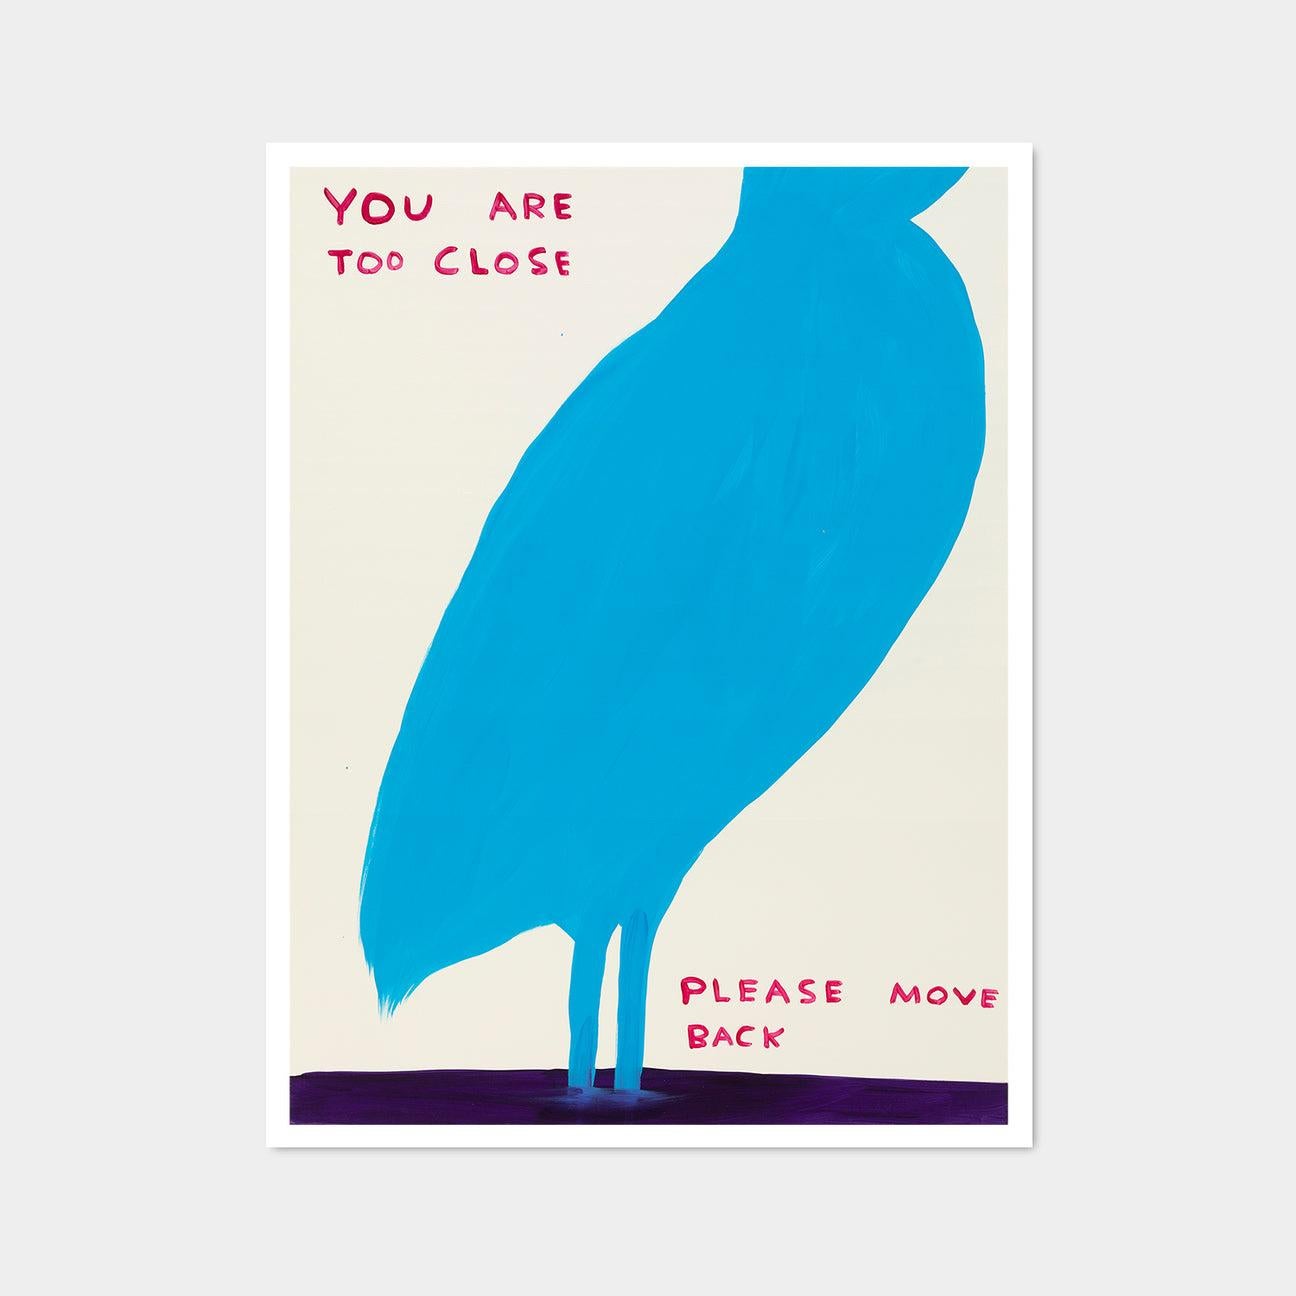 David Shrigley, You Are Too Close, 2019 

Off-set lithograph 
Open edition, unframed 
60 x 80 cm (23.62 x 31.5 inches) 
Printed on 200g Munken Lynx paper by Narayana Press in Denmark 

This print is based on the original acrylic on paper work by